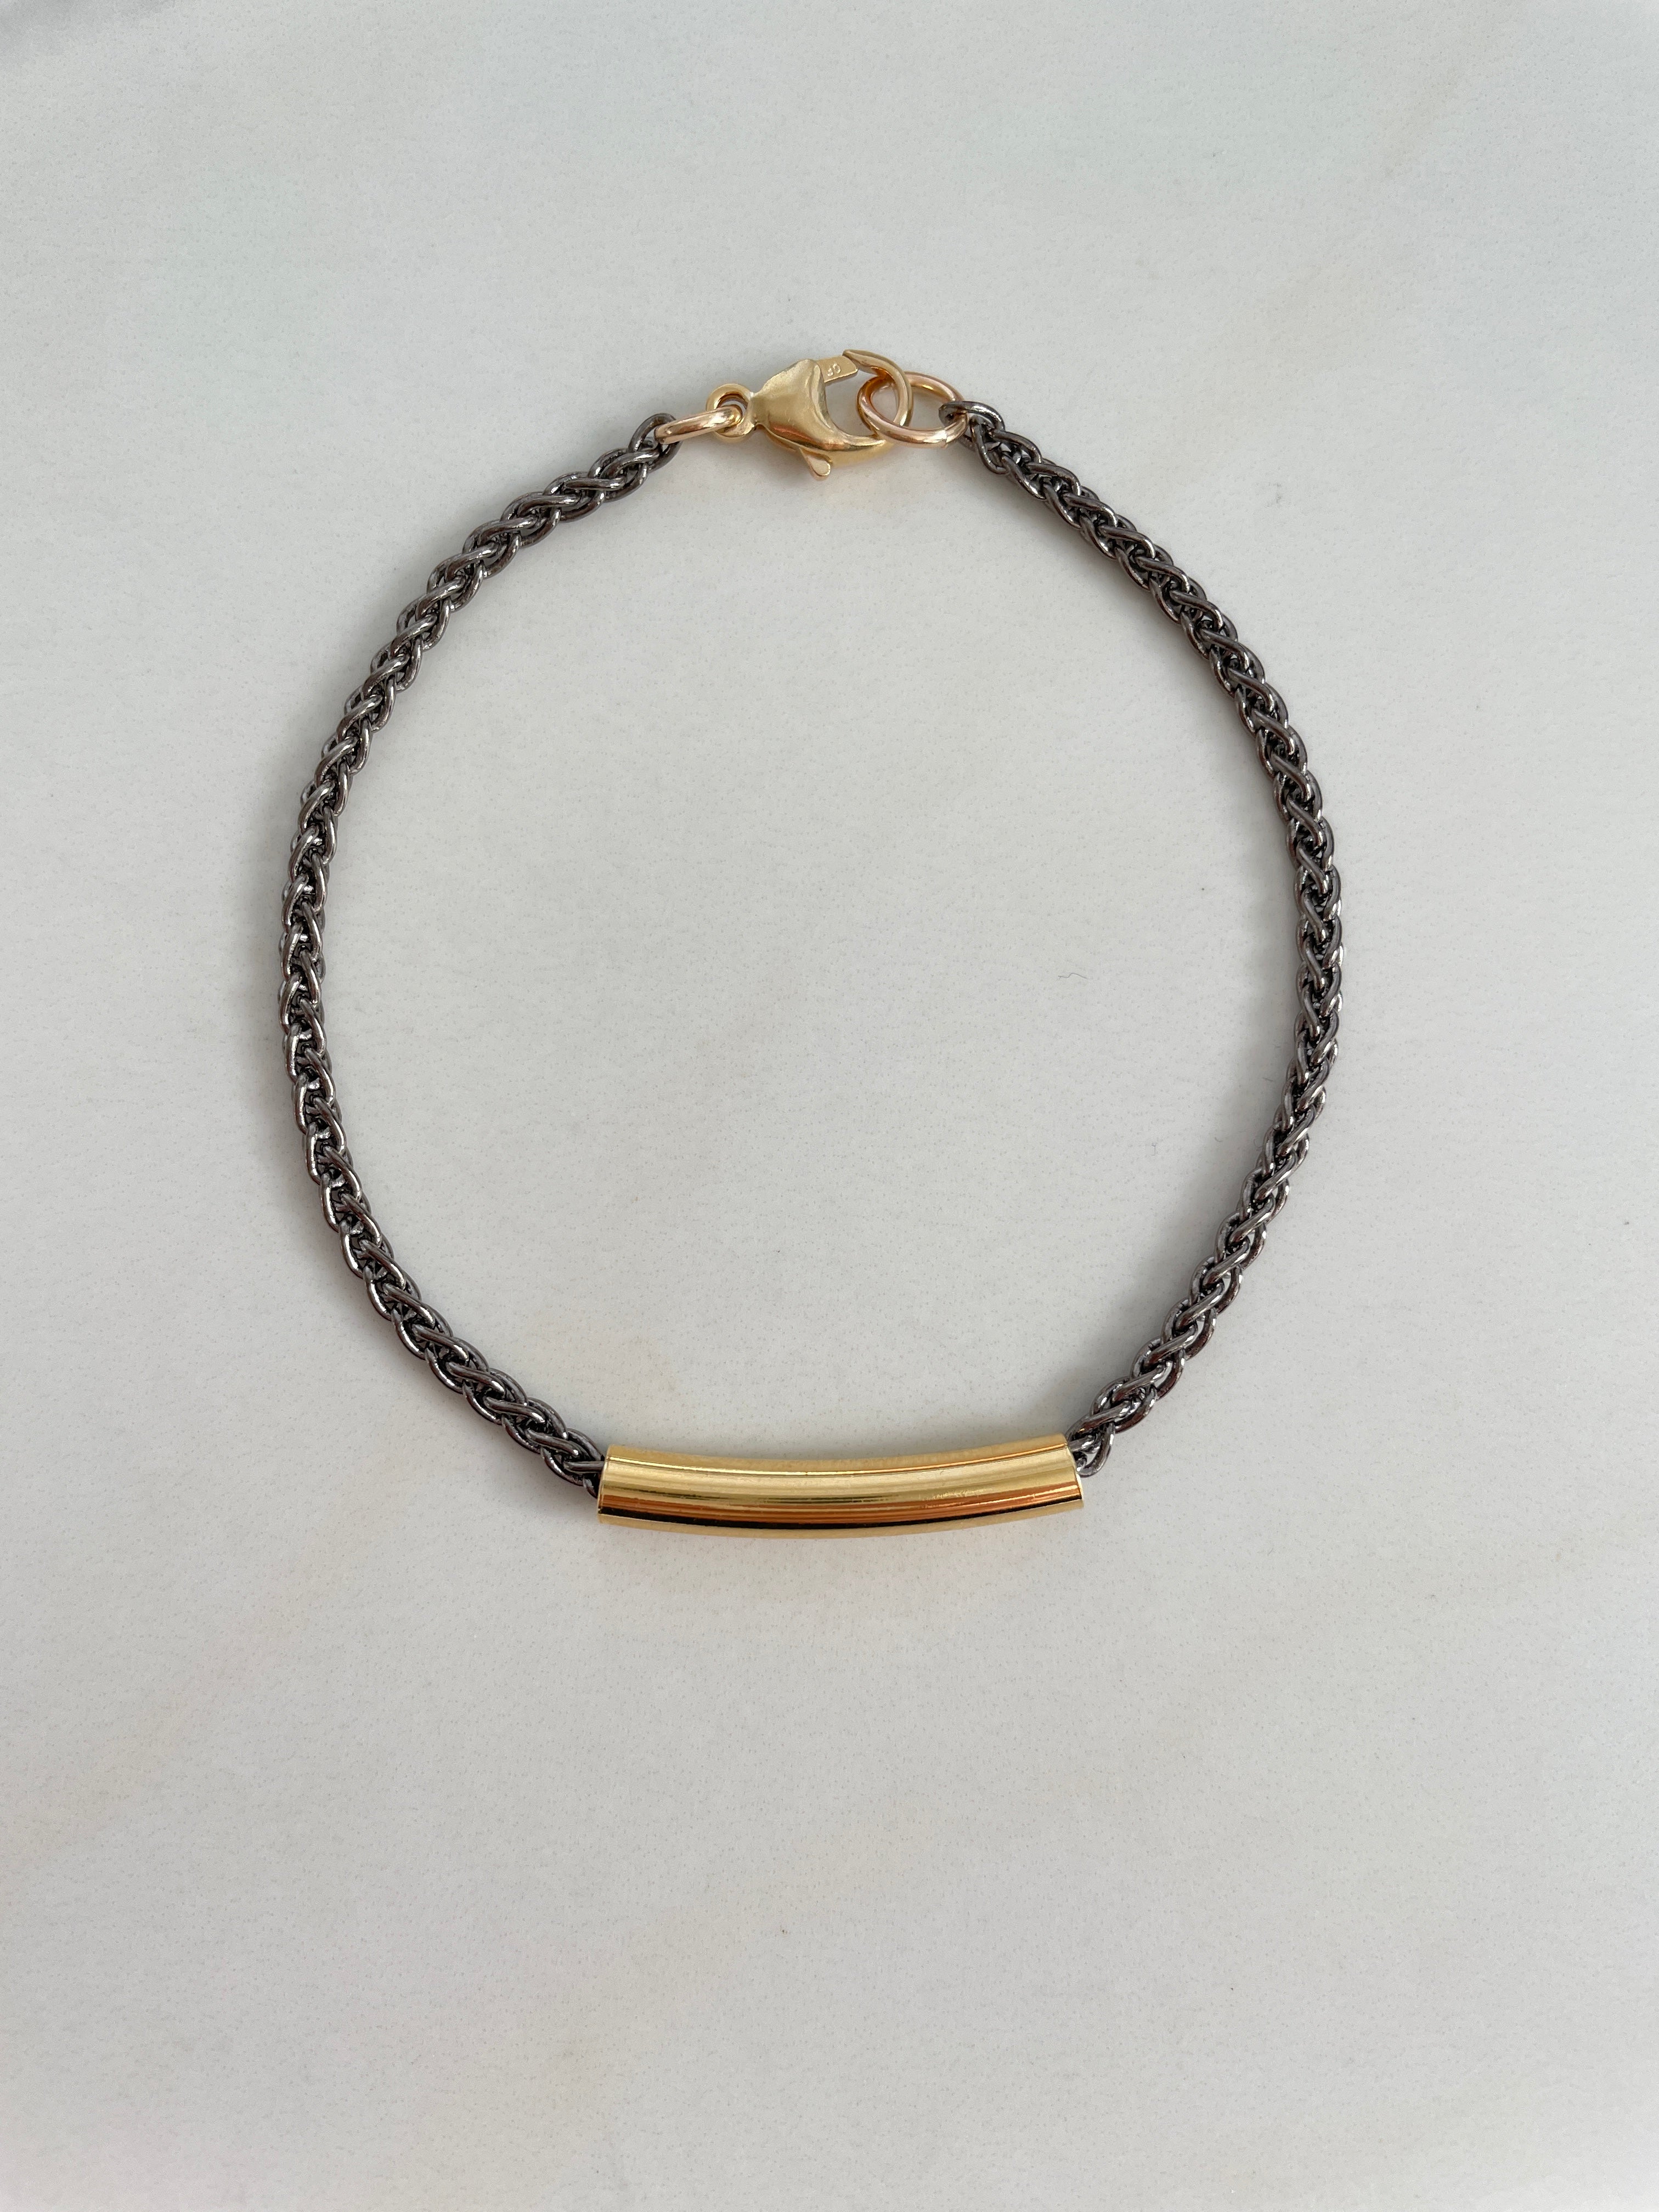 Mixed metal silver and gold traveler bracelet